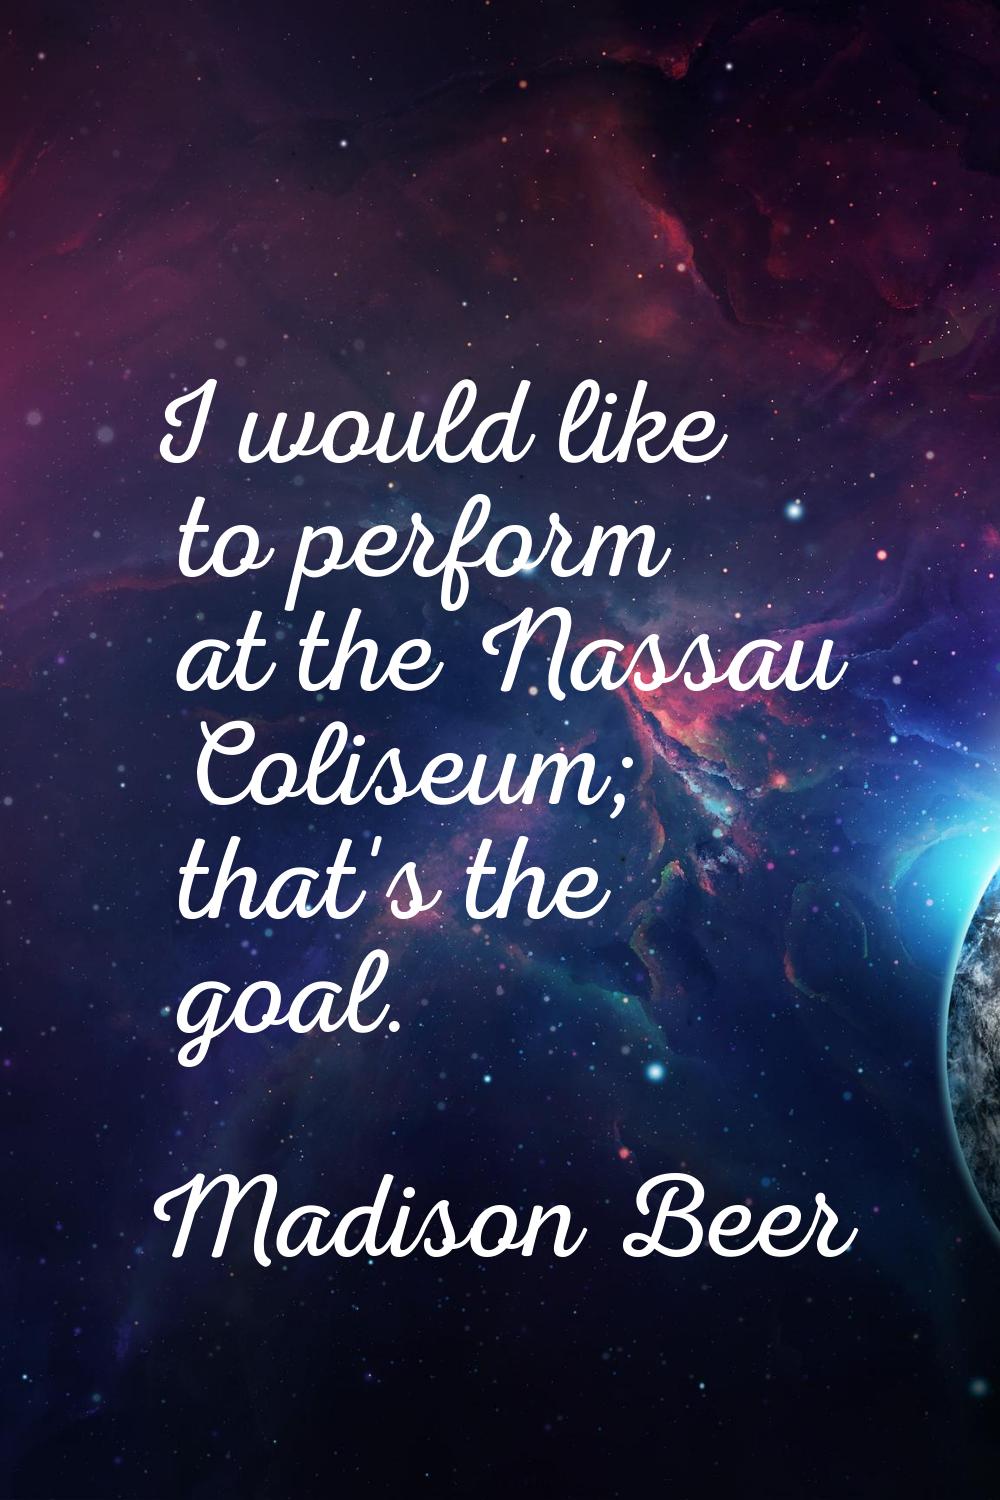 I would like to perform at the Nassau Coliseum; that's the goal.